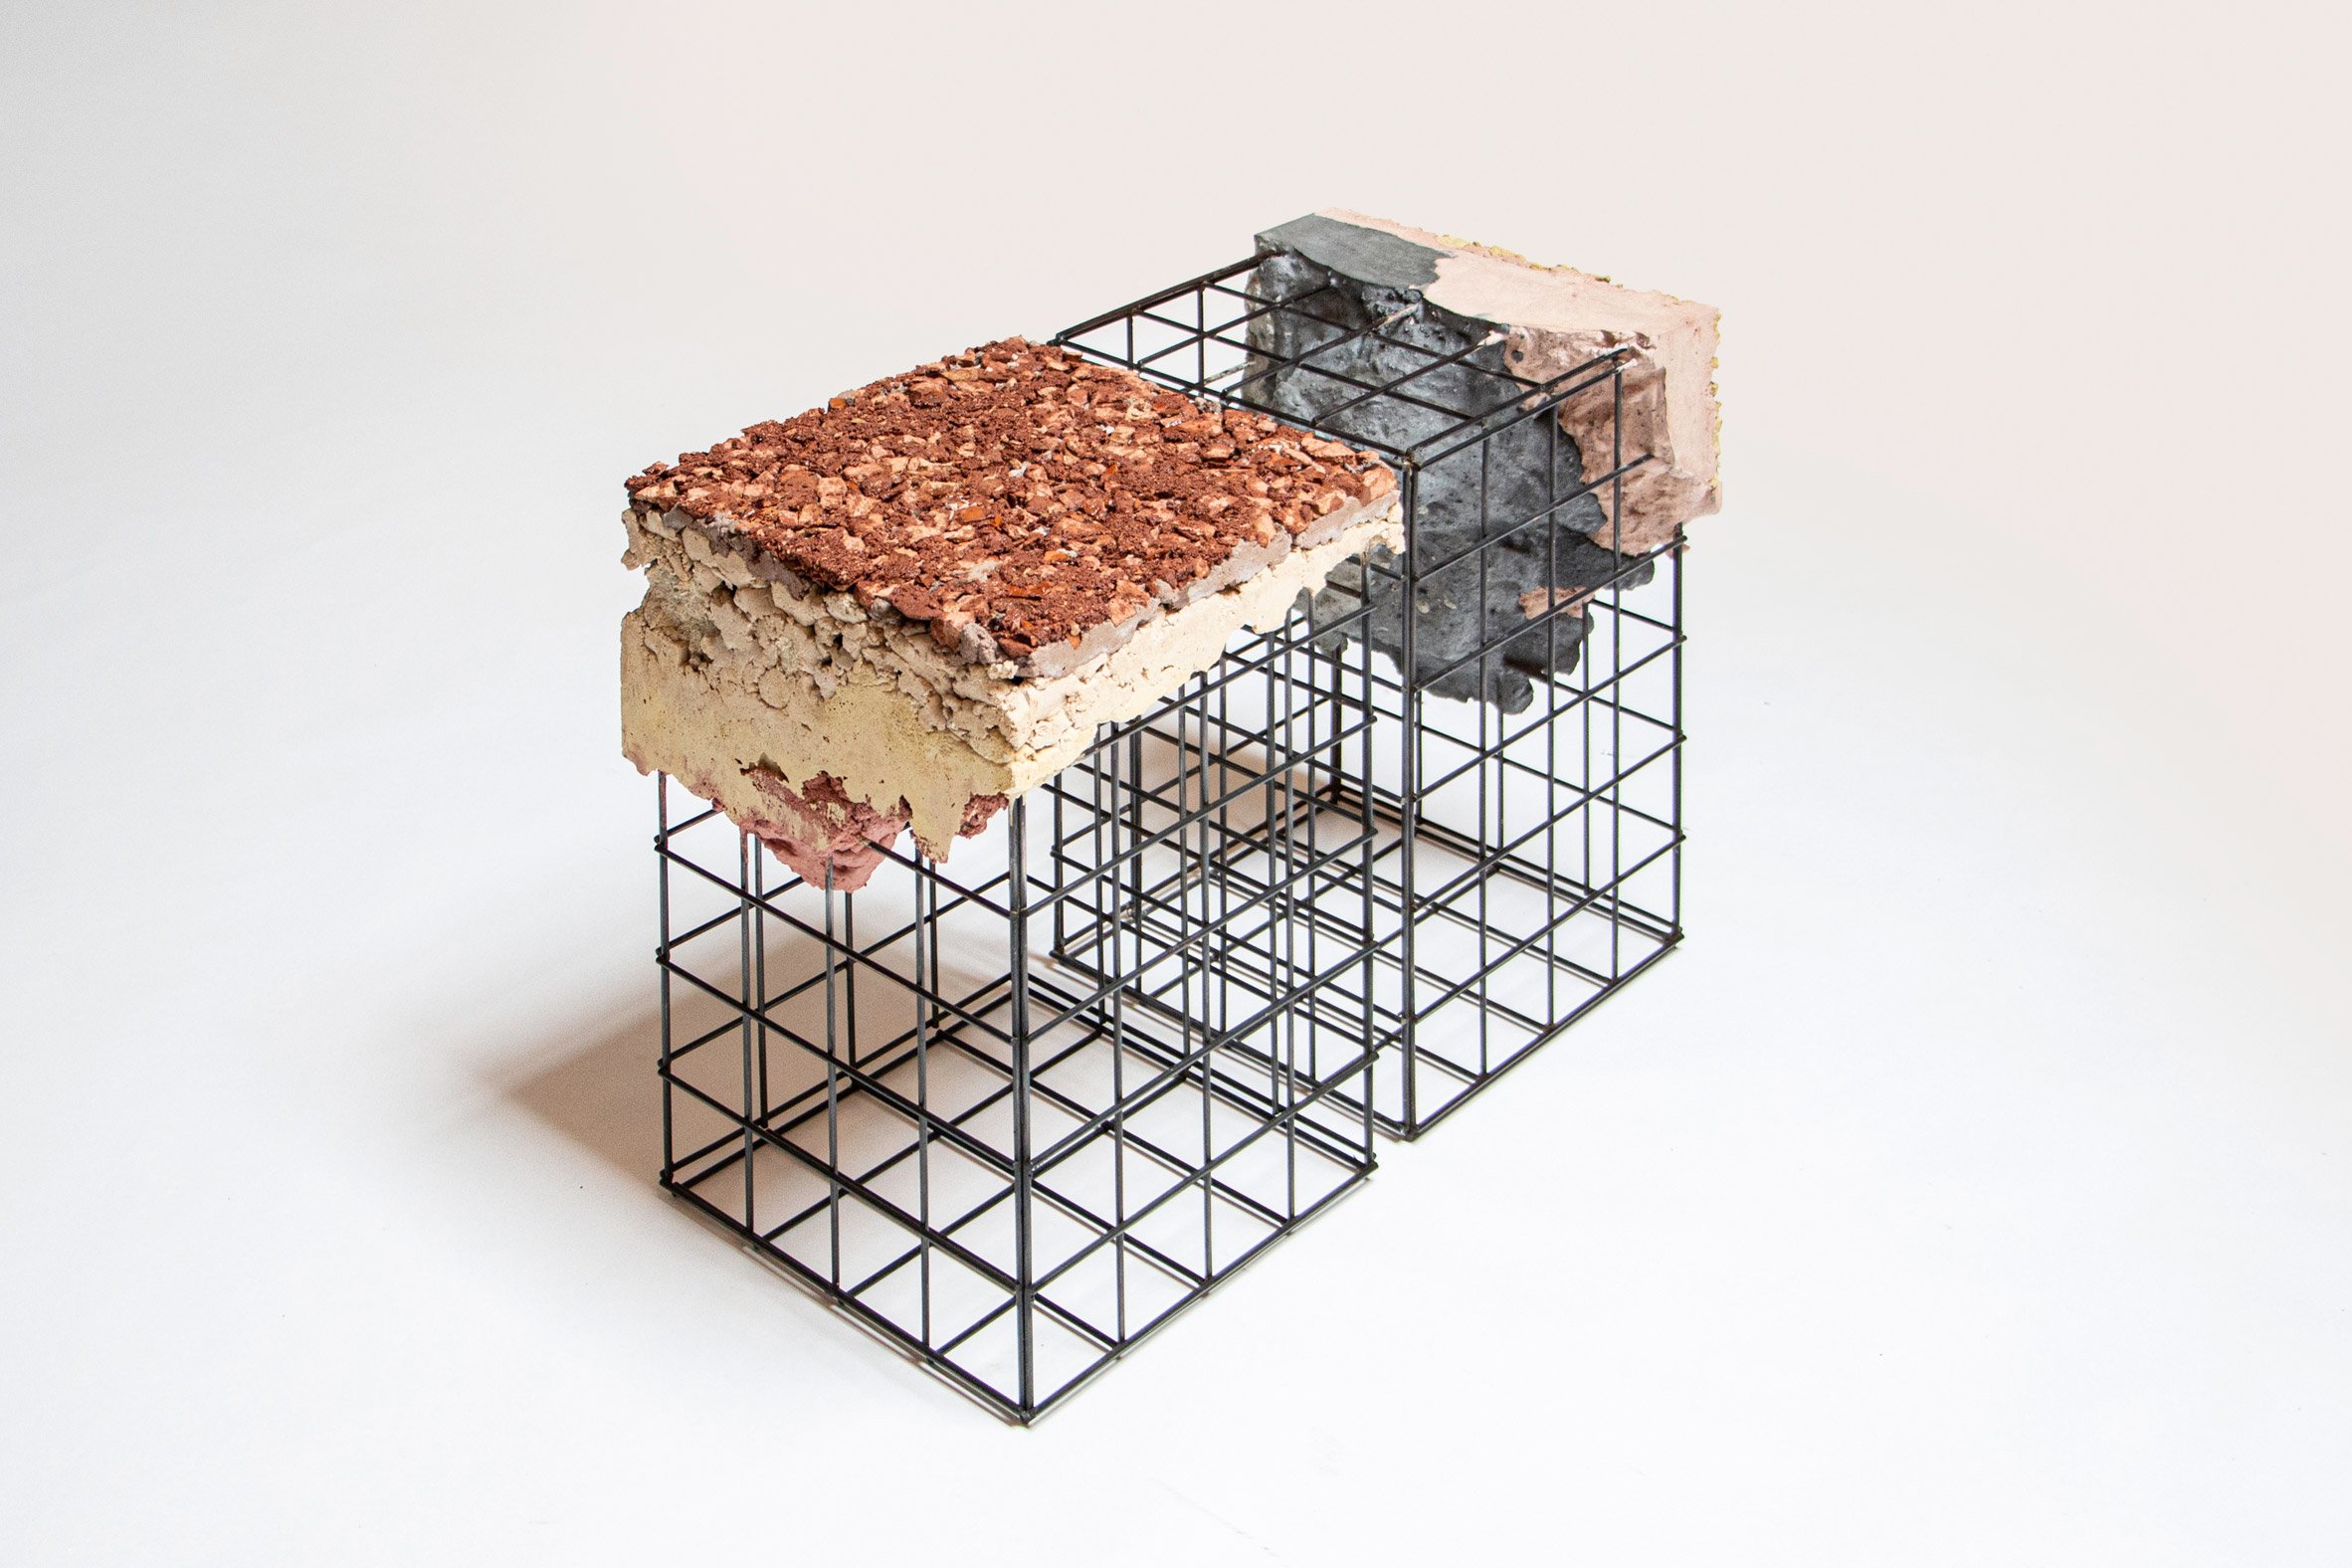 Stool modules from Appropriating the Grid furniture collection